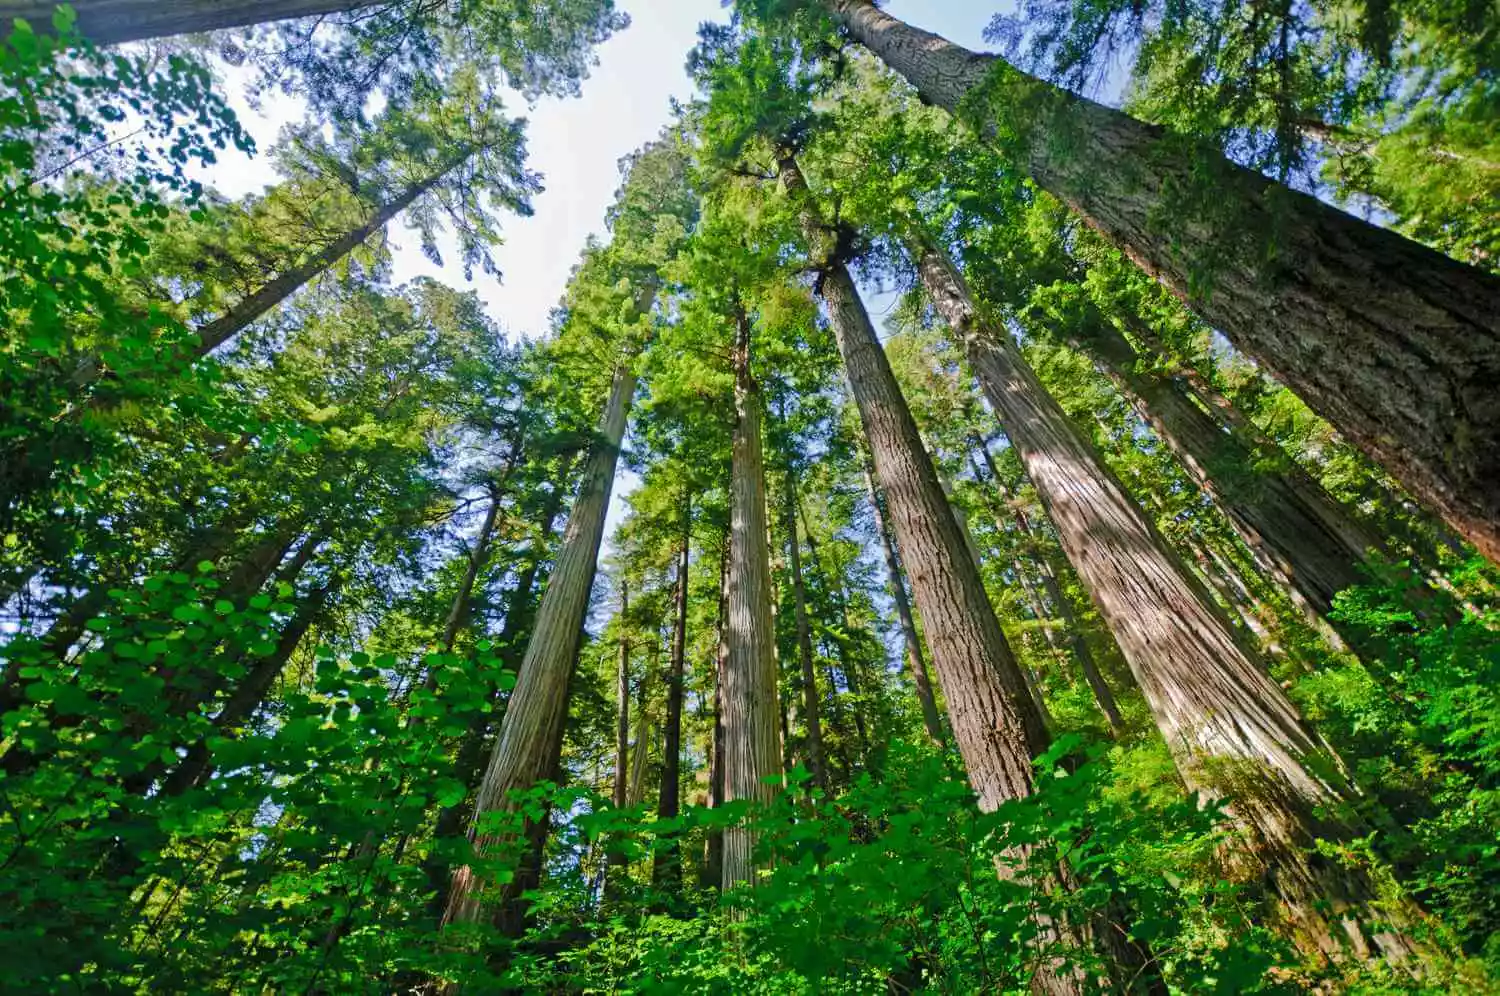 Majestic Redwoods Discovering California's Ancient Giants